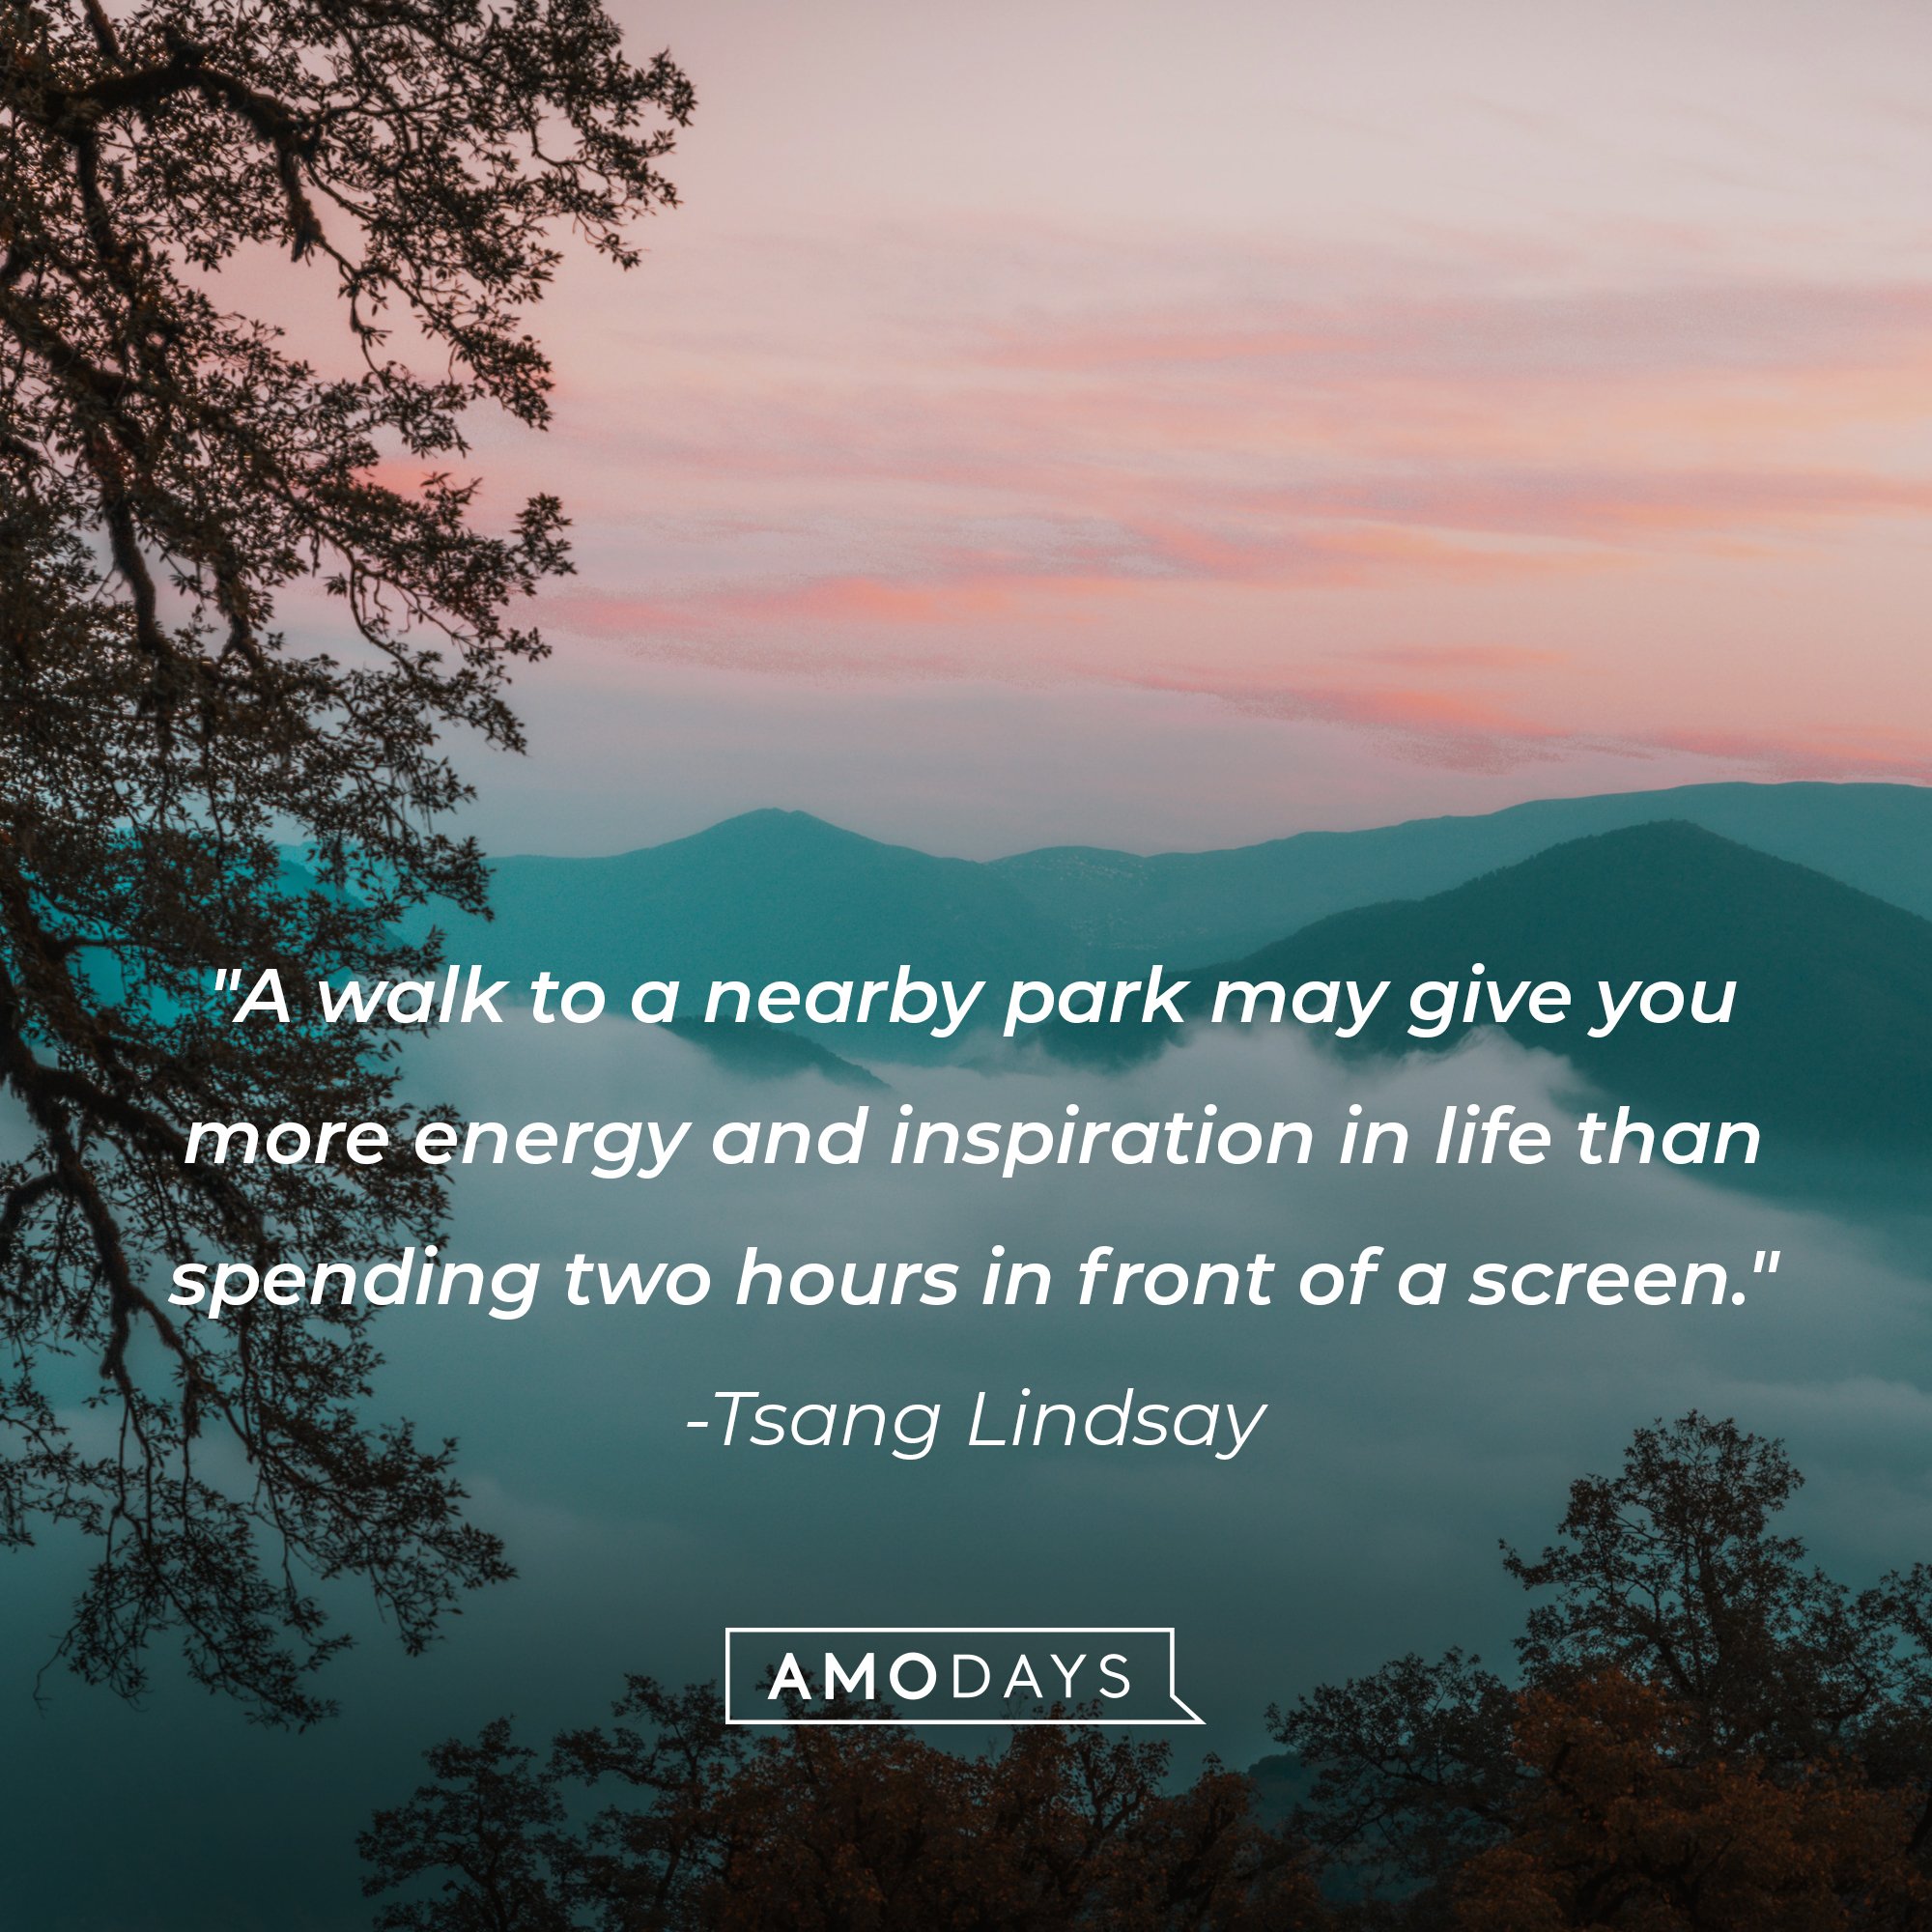 Tsang Lindsay’s quote: "A walk to a nearby park may give you more energy and inspiration in life than spending two hours in front of a screen." | Image: AmoDays   